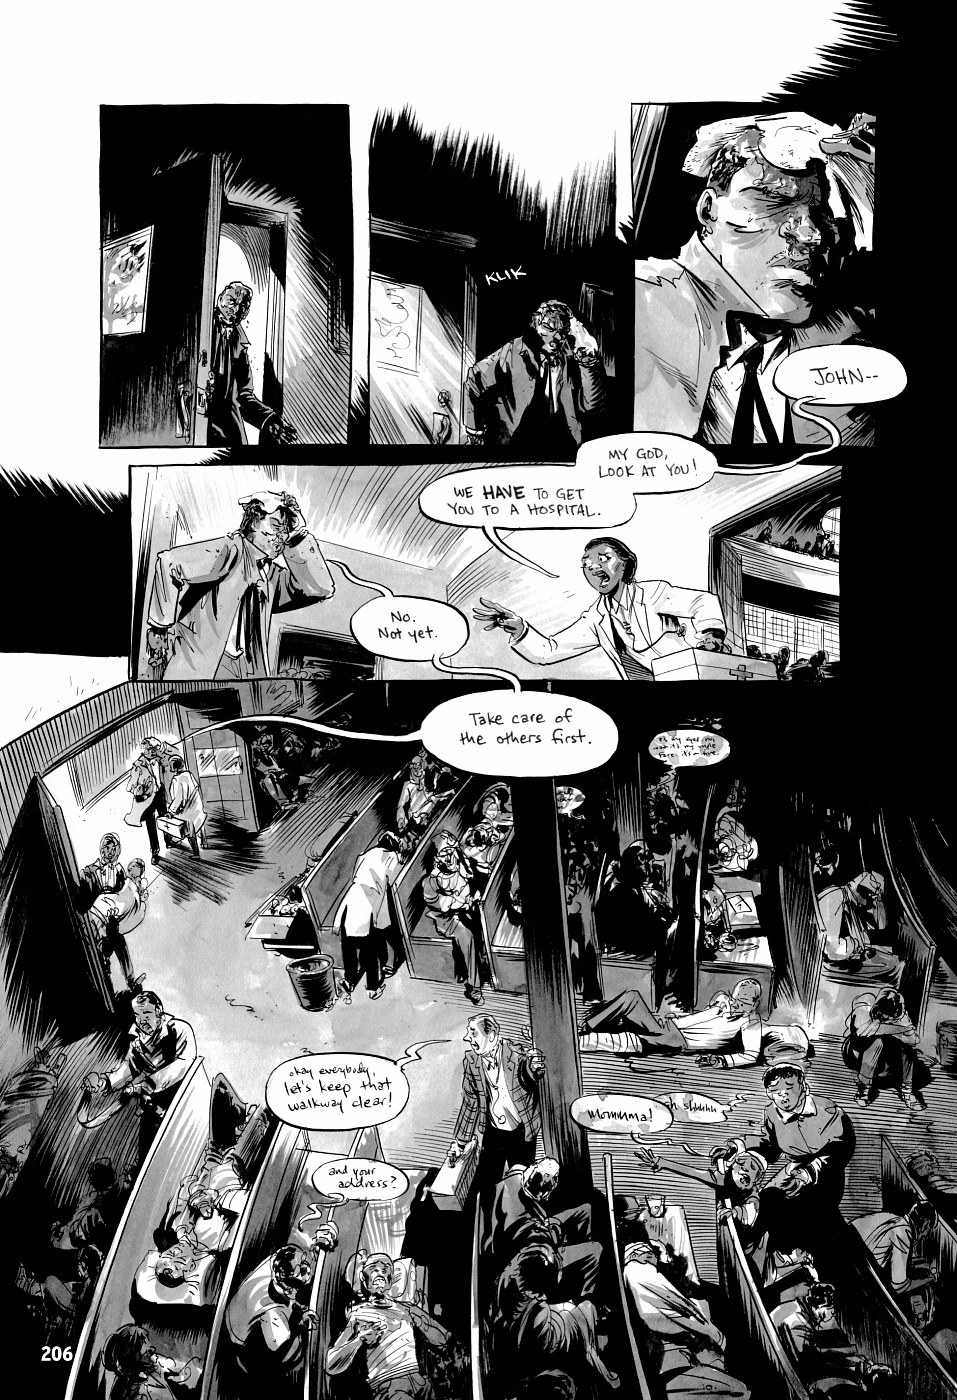 page 206 of march book three graphic novel